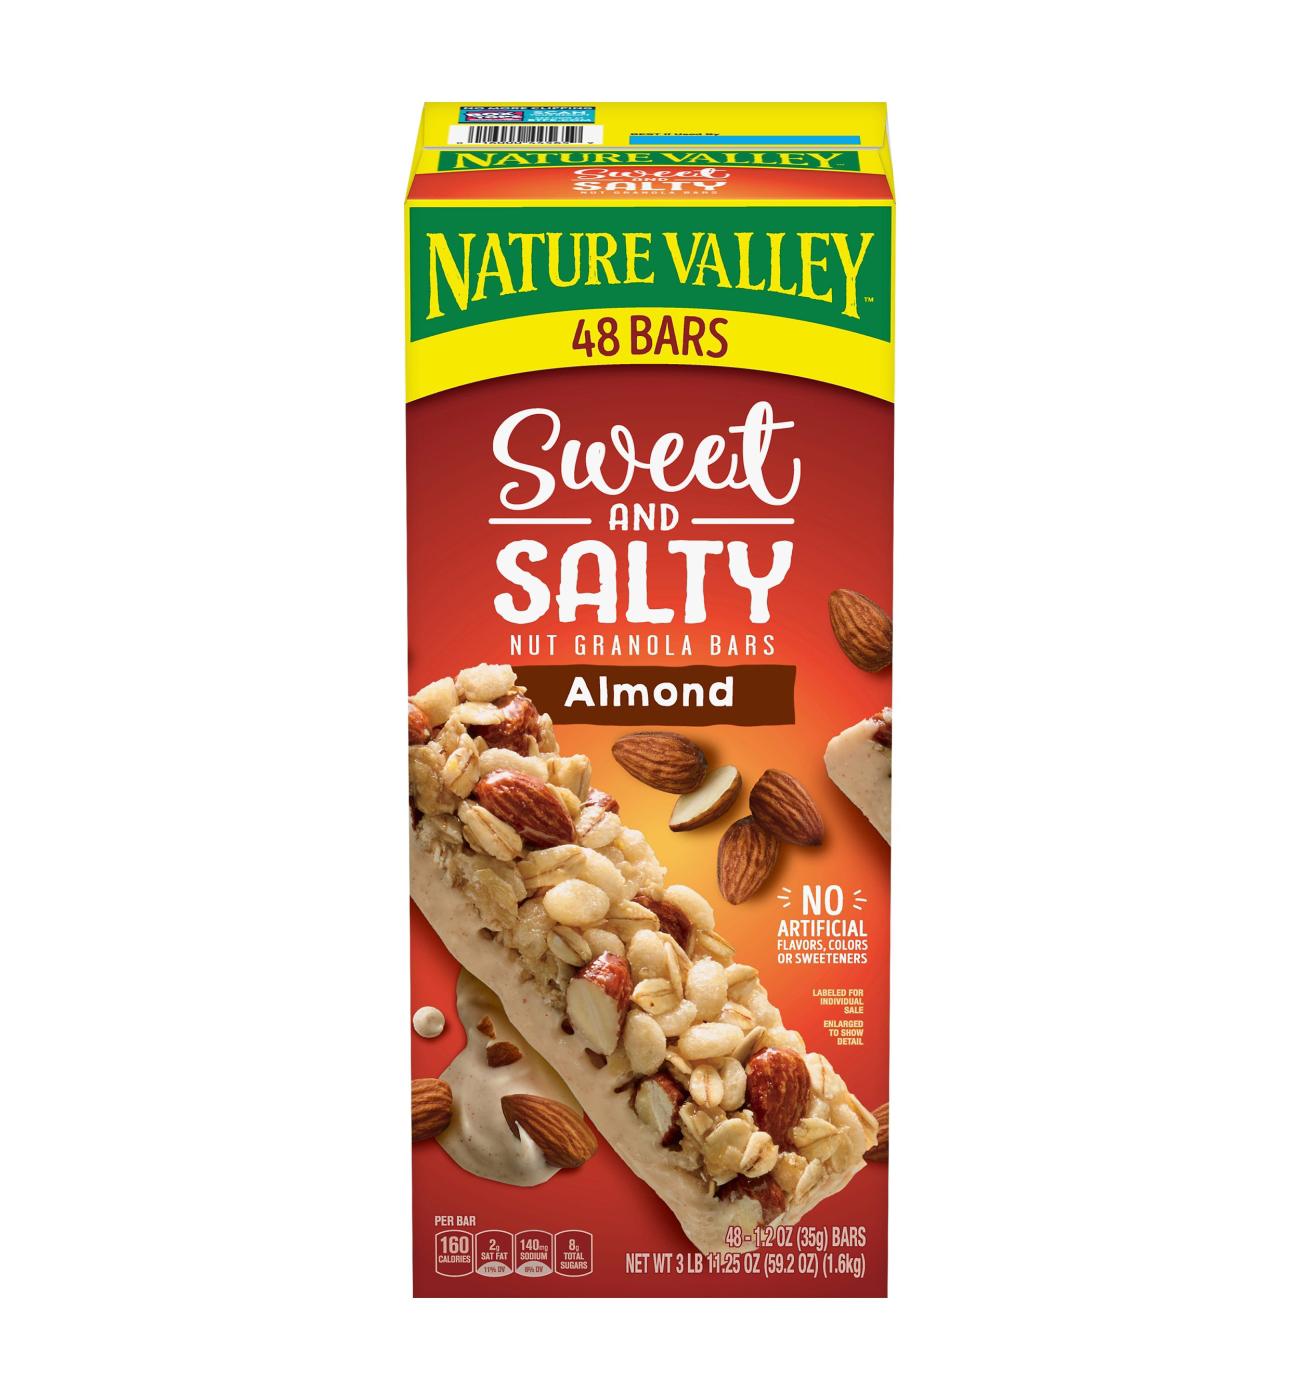 Nature Valley Sweet & Salty Almond Granola Bars; image 1 of 2